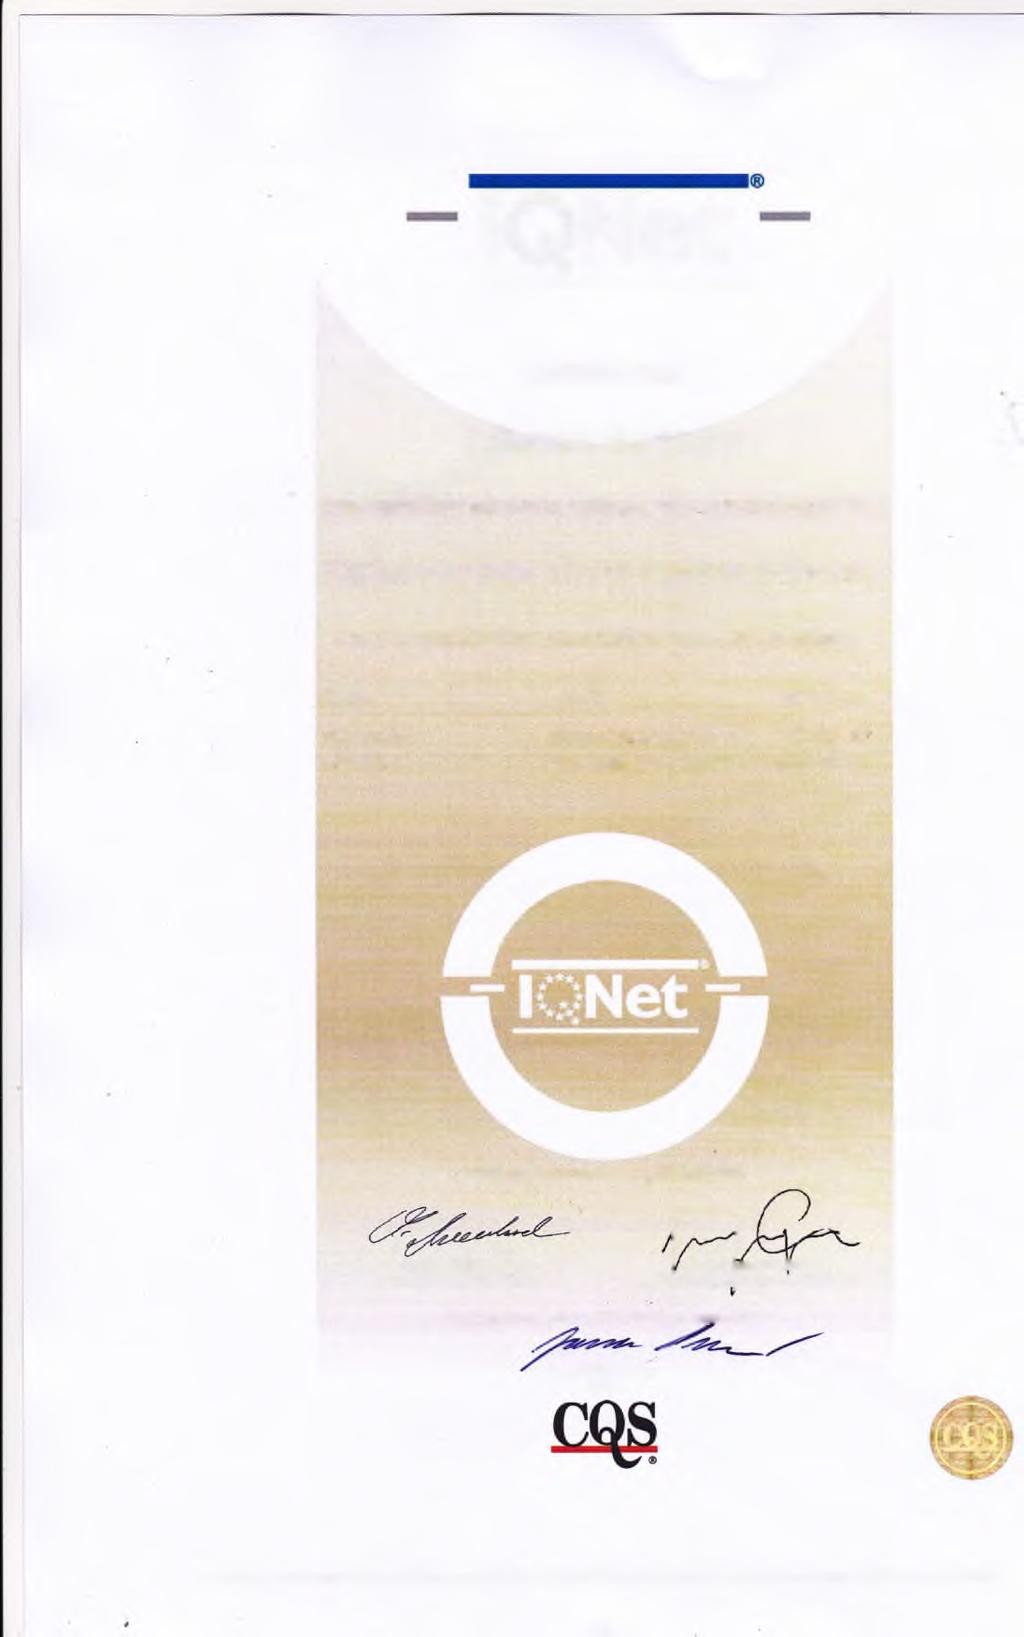 IQNet Certifies that Zdenek Santora has satisfied all the requirements according to the IQNet Auditor